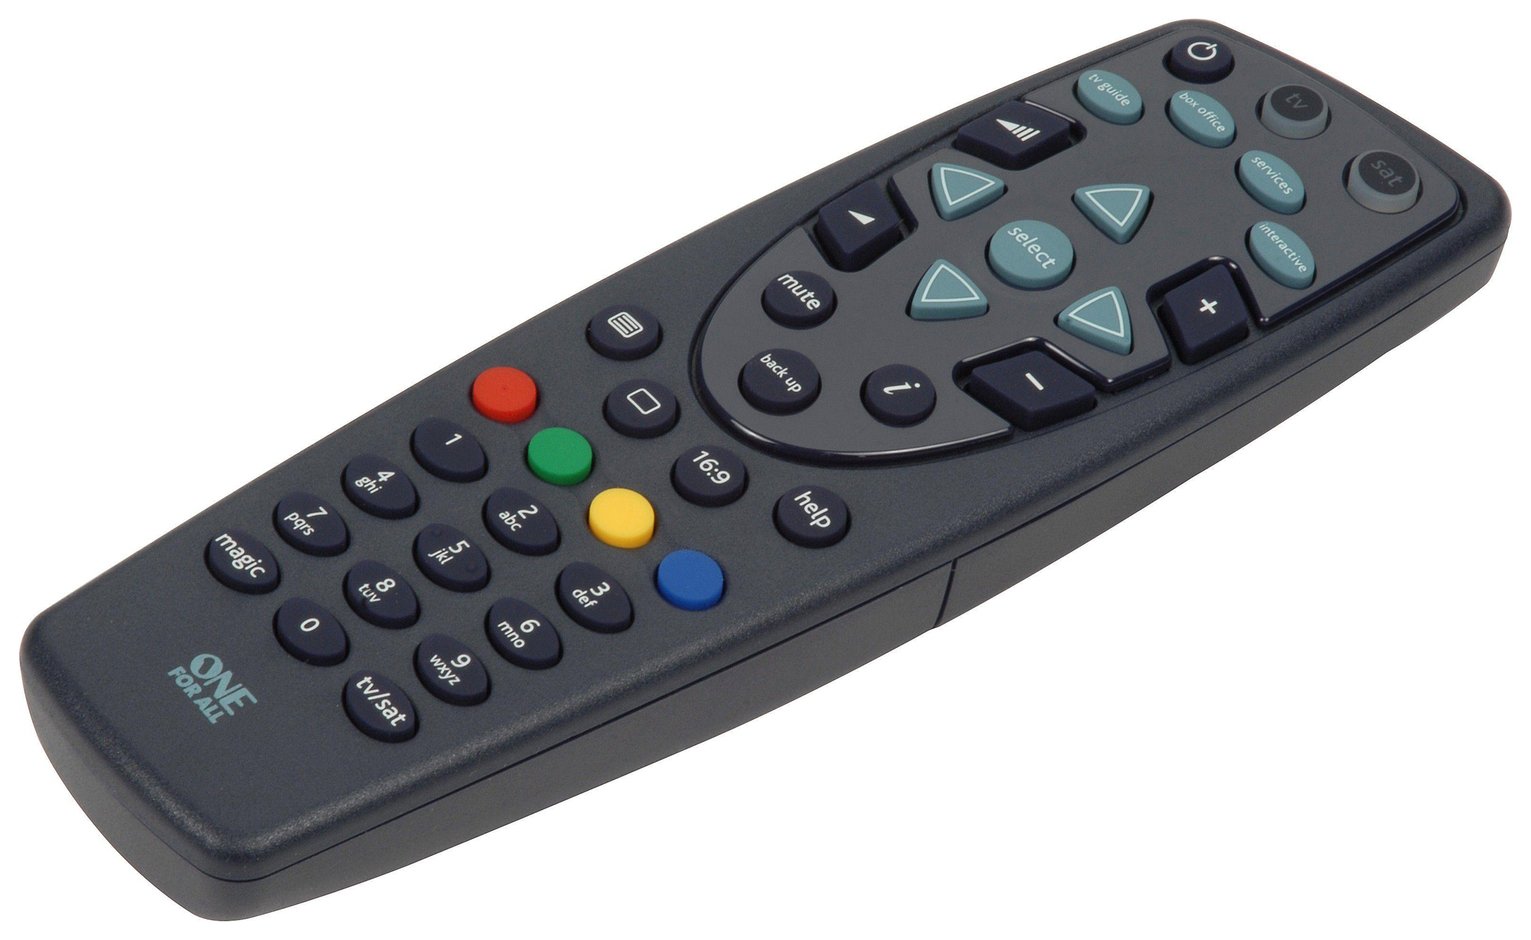 One For All URC1625 Sky Replacement Remote Control Review